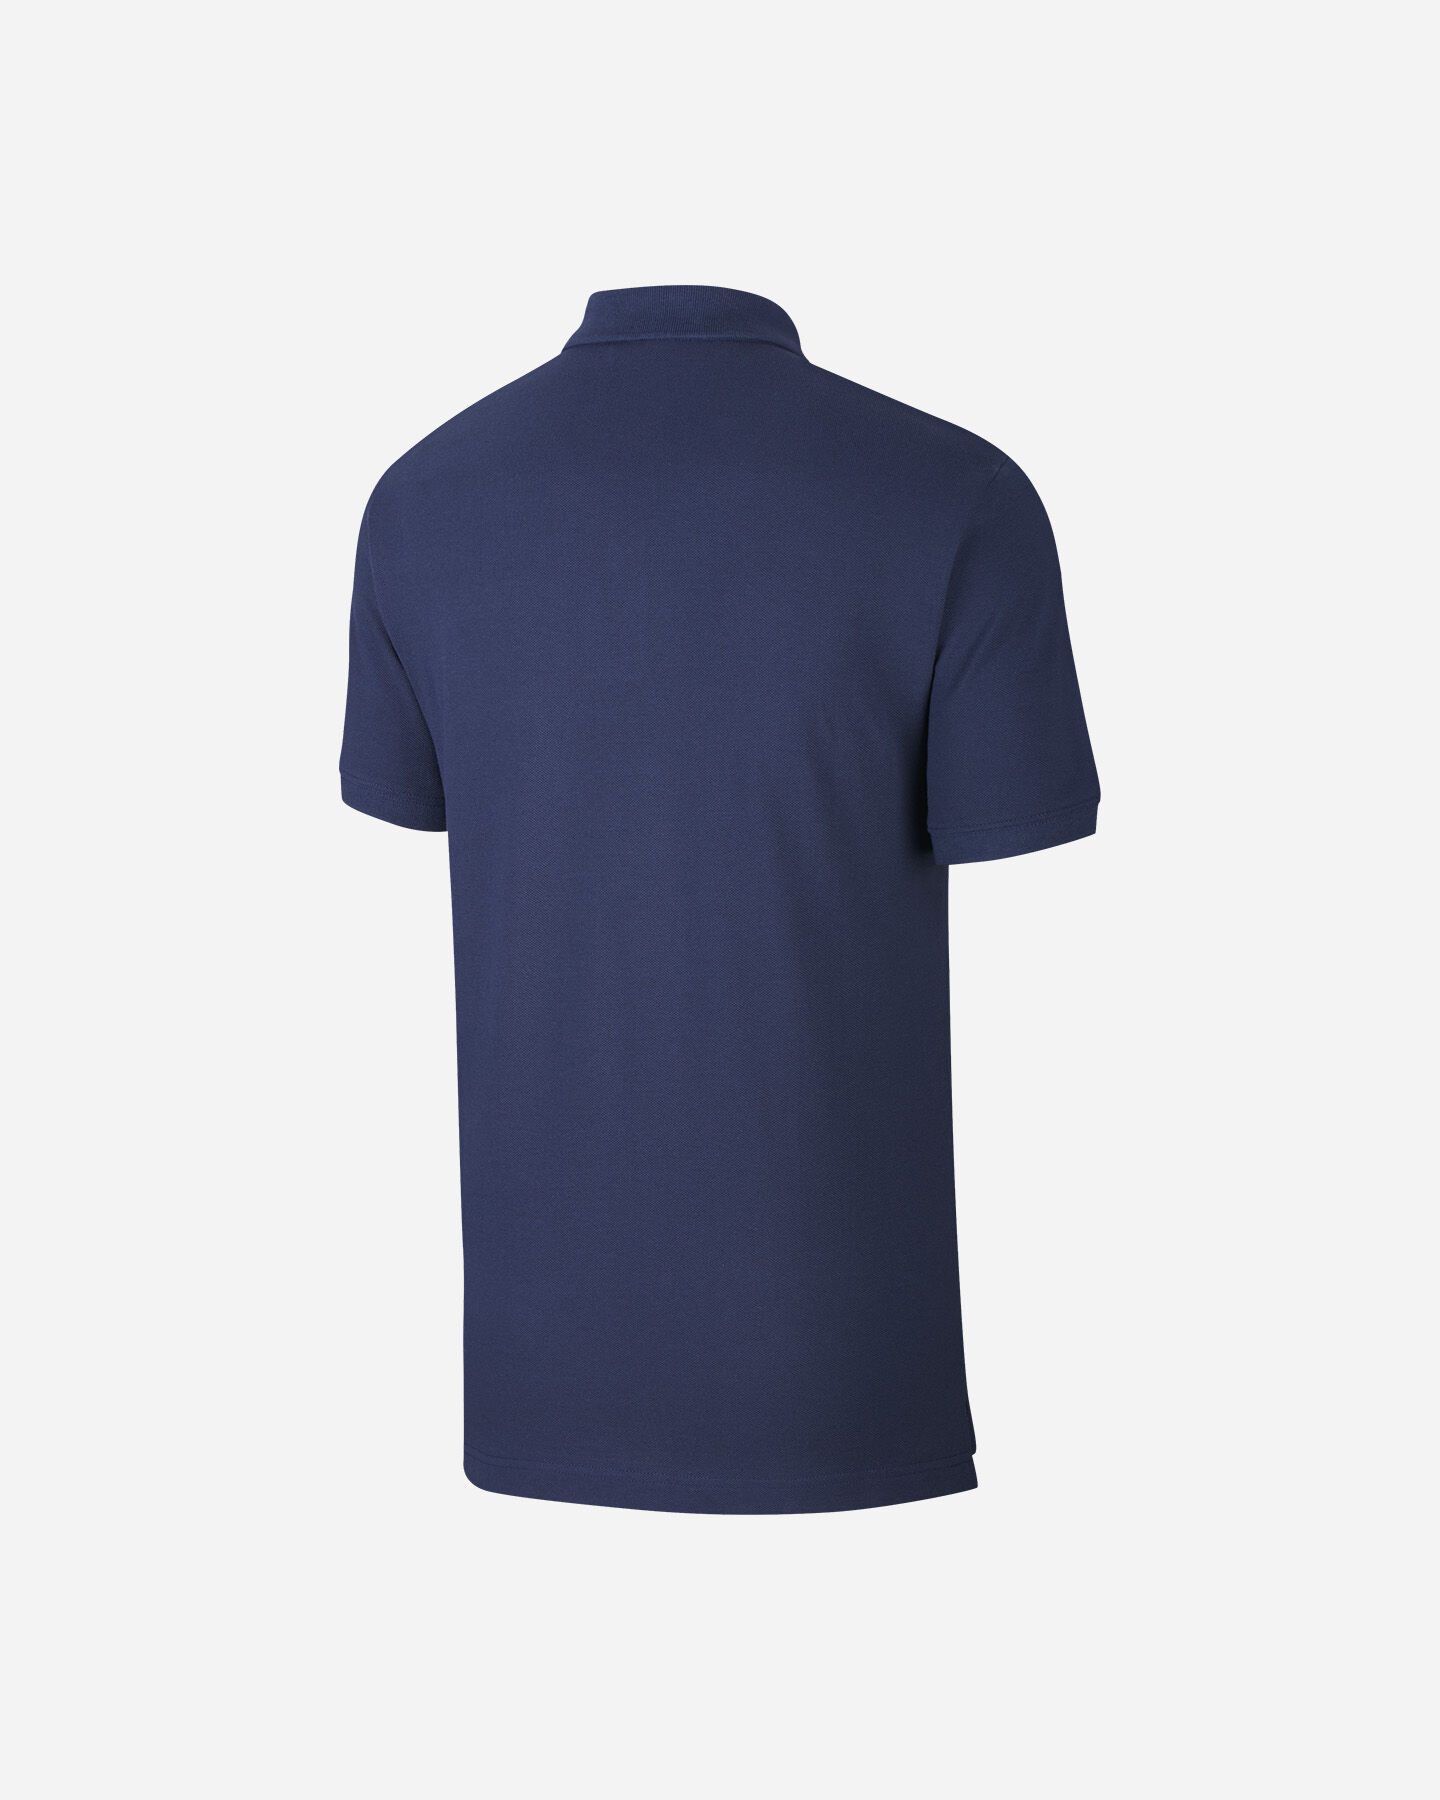  T-Shirt NIKE MATCHUP M S5164260 scatto 1